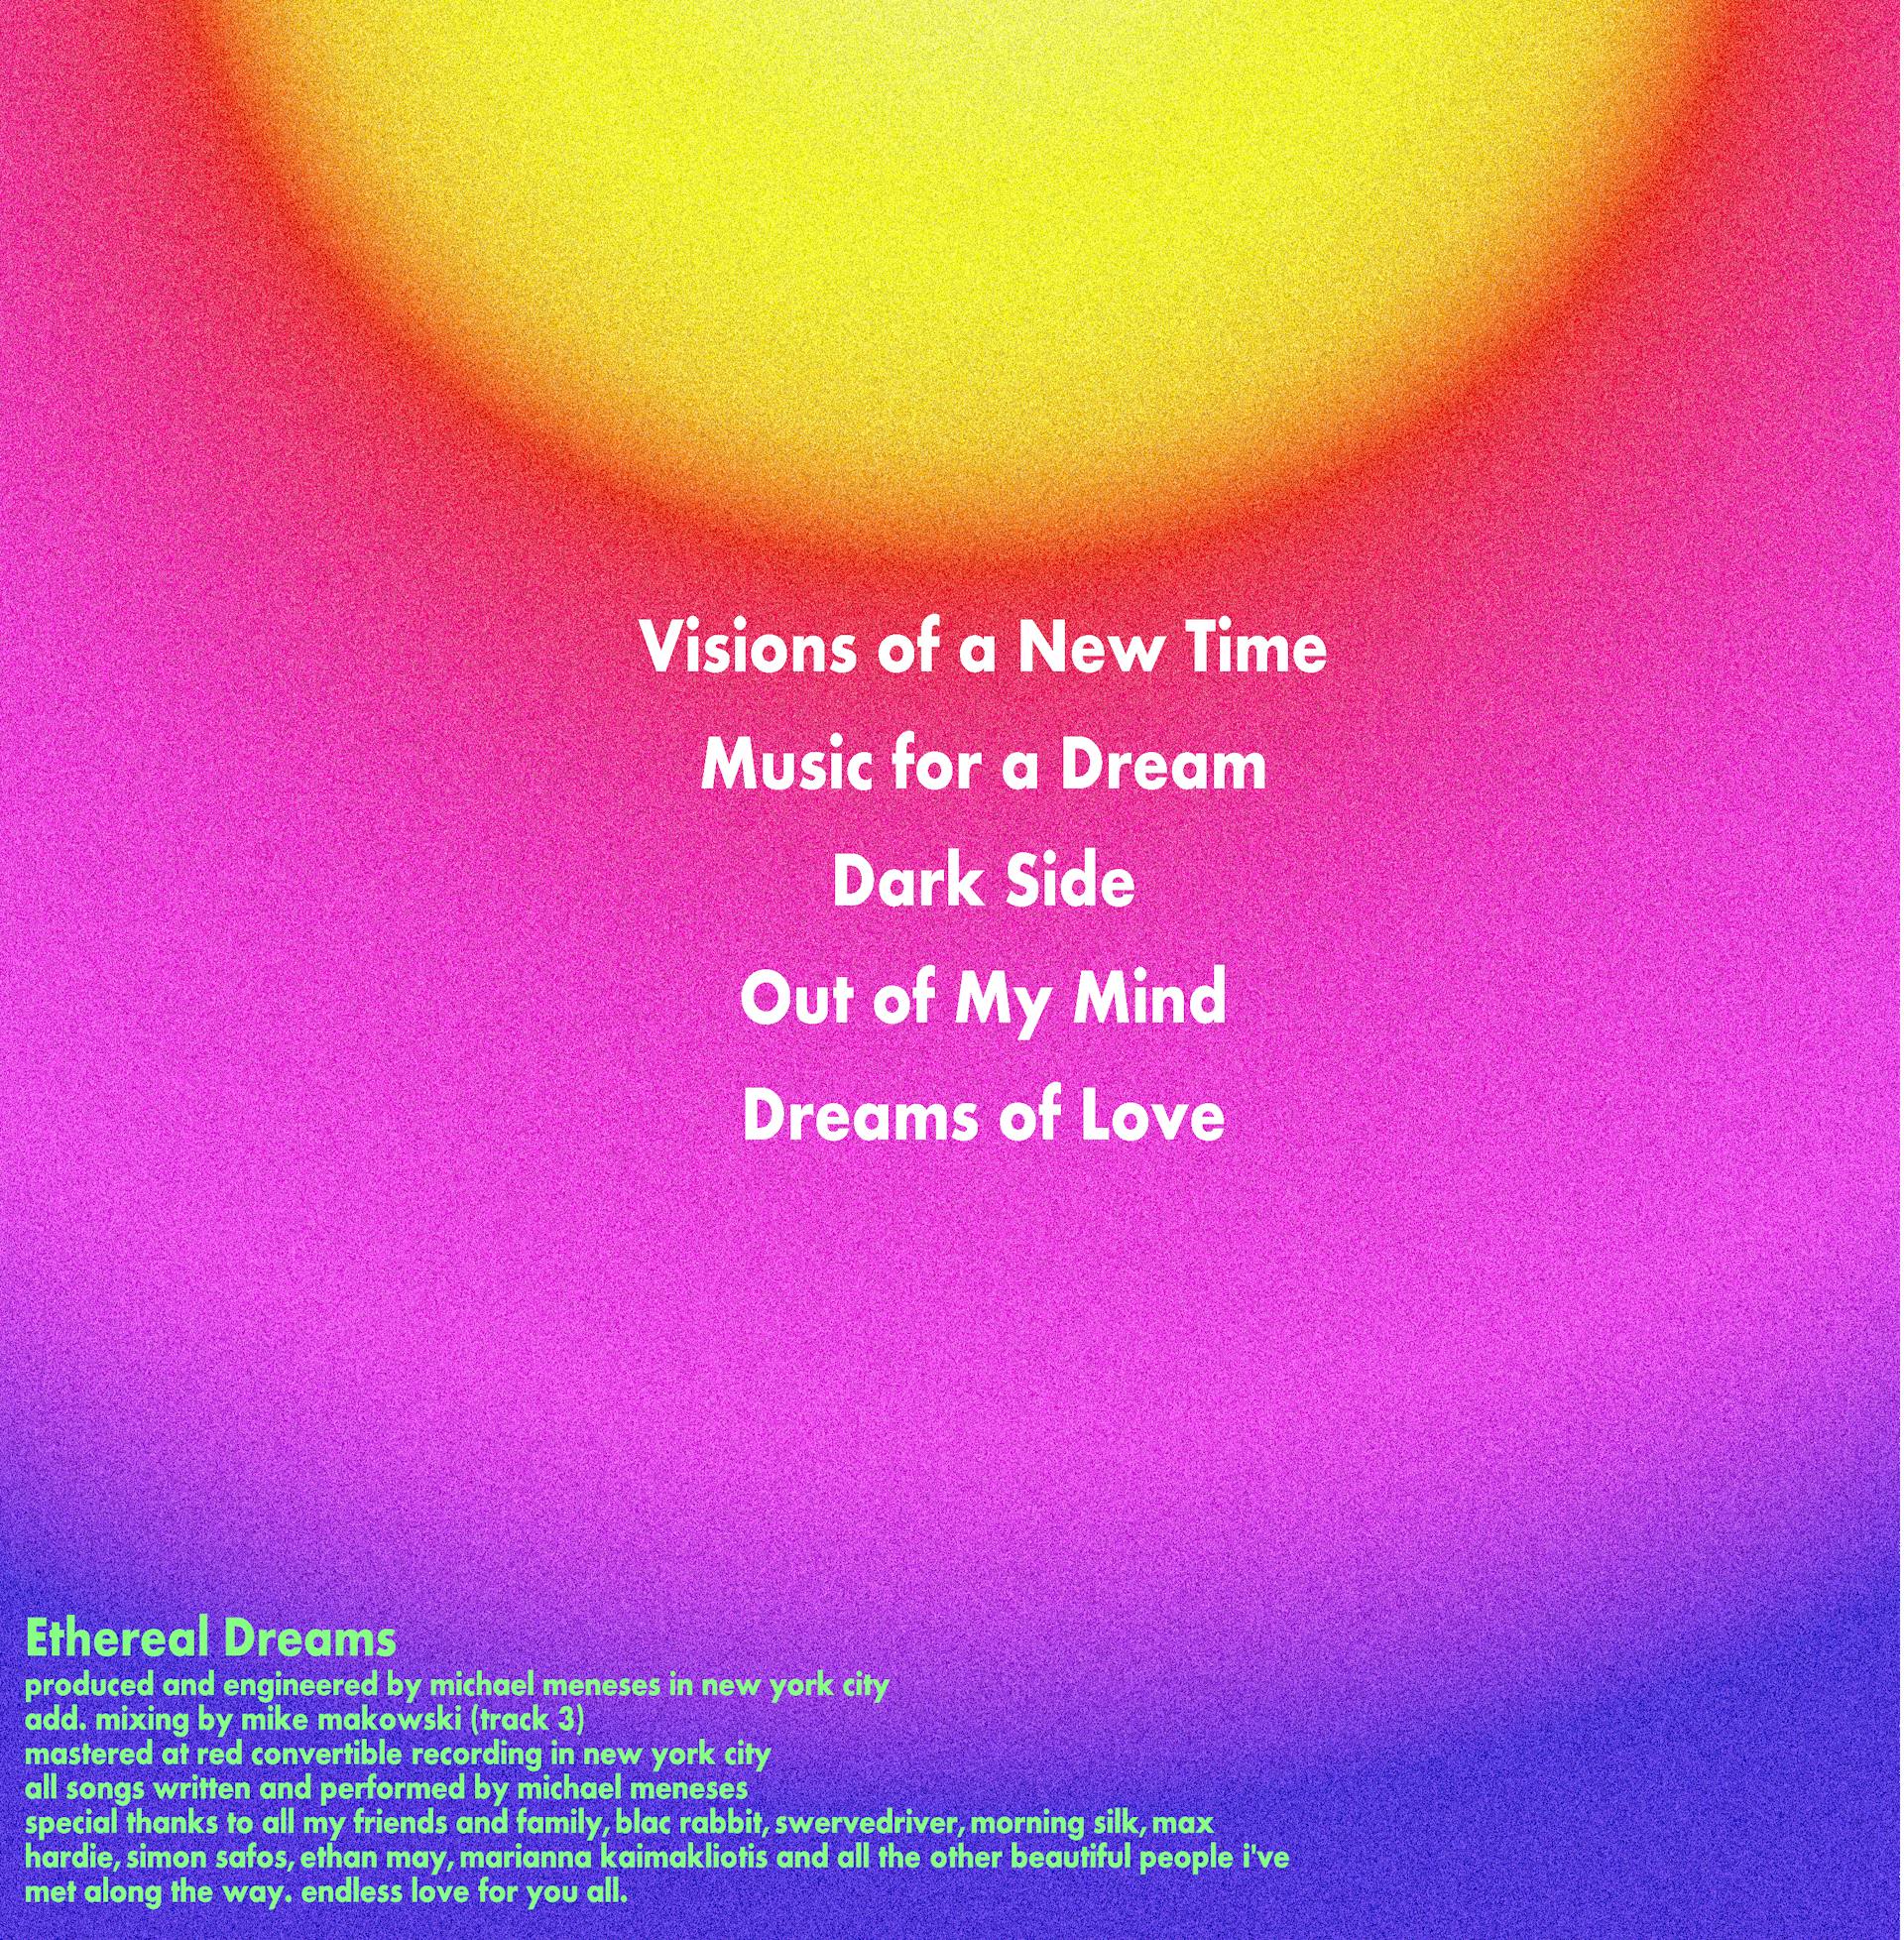 Back cover for Ethereal Dreams, 2020